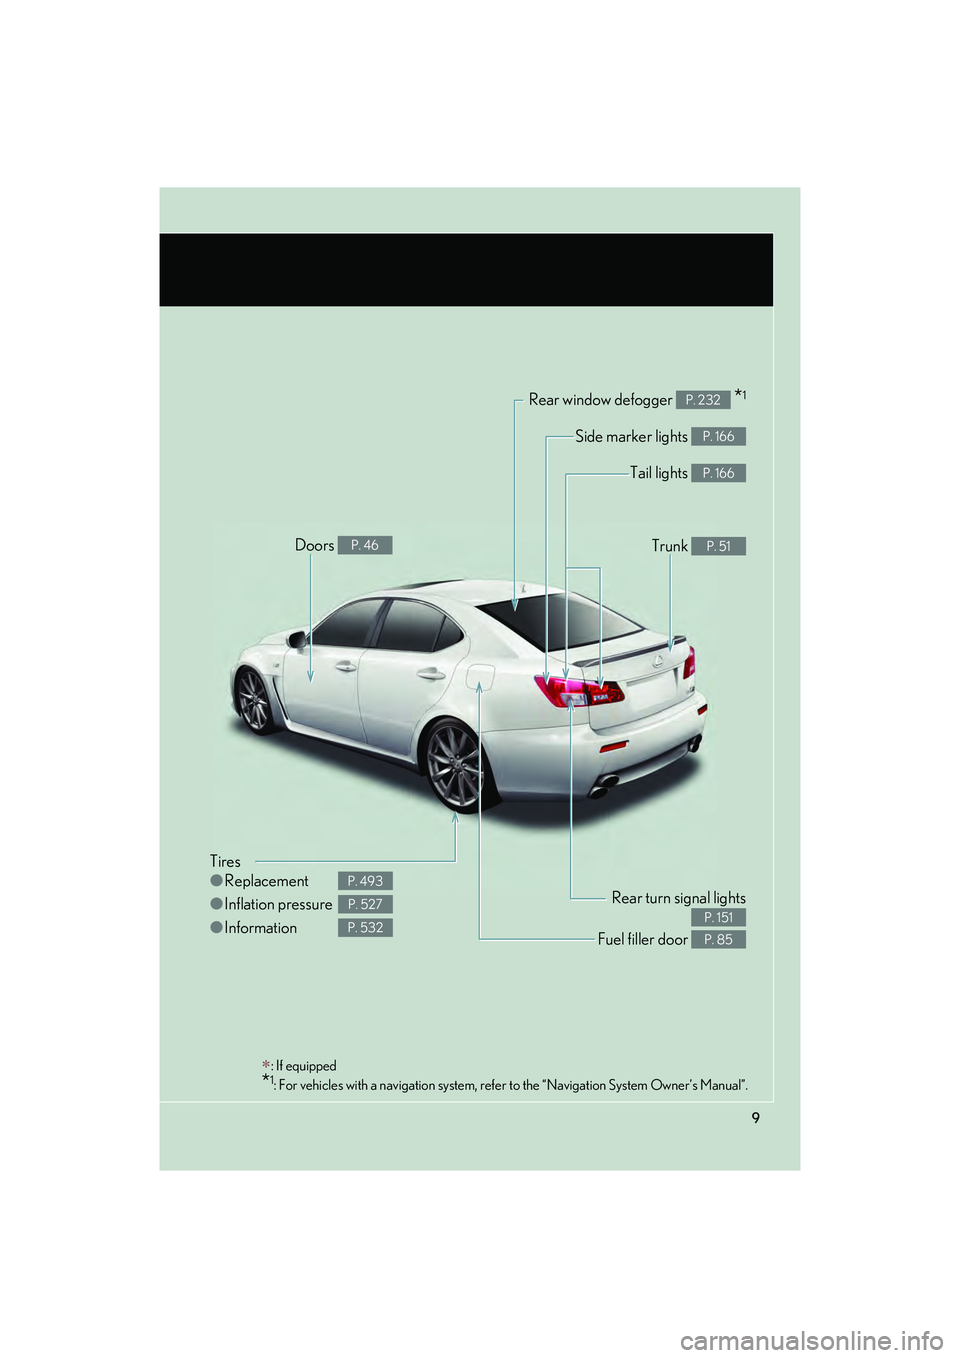 Lexus IS F 2014  Owners Manual IS F_U
9
Rear window defogger   *1P. 232
Tires
●Replacement
● Inflation pressure
● Information
P. 493
P. 527
P. 532
Tail lights P. 166
Side marker lights P. 166
Trunk P. 51Doors P. 46
Fuel fille